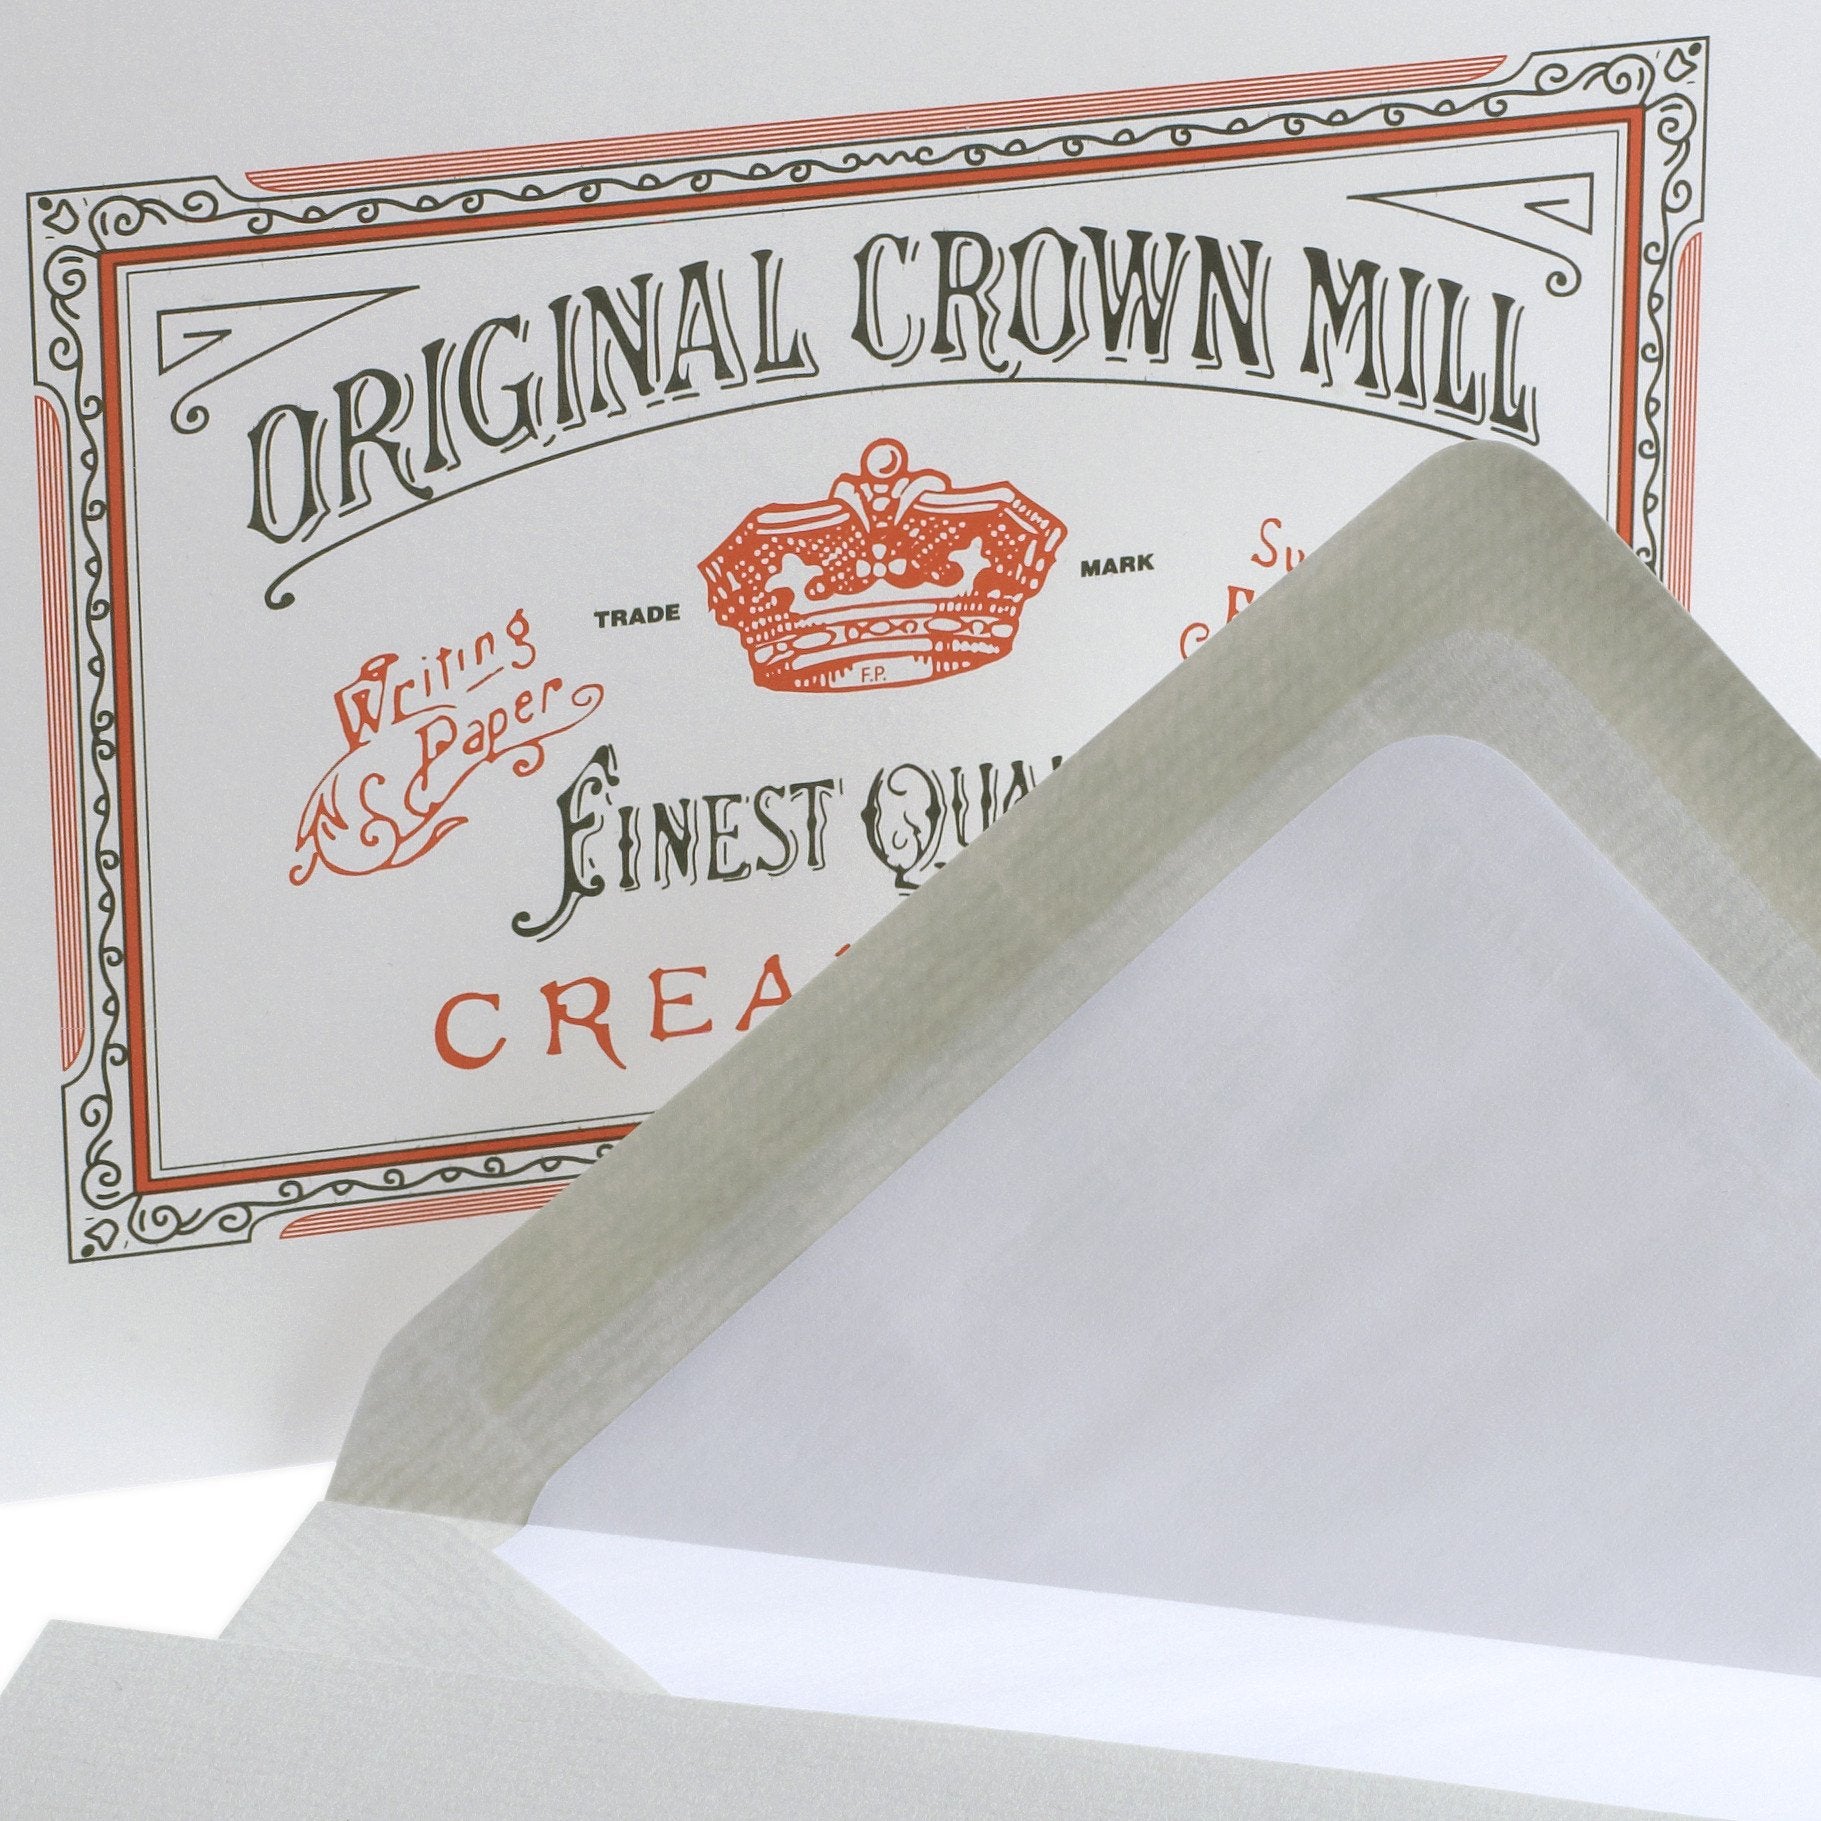 Original Crown Mill Stationery - Color Vellum Note Card Assortments  #OLD-OCM35